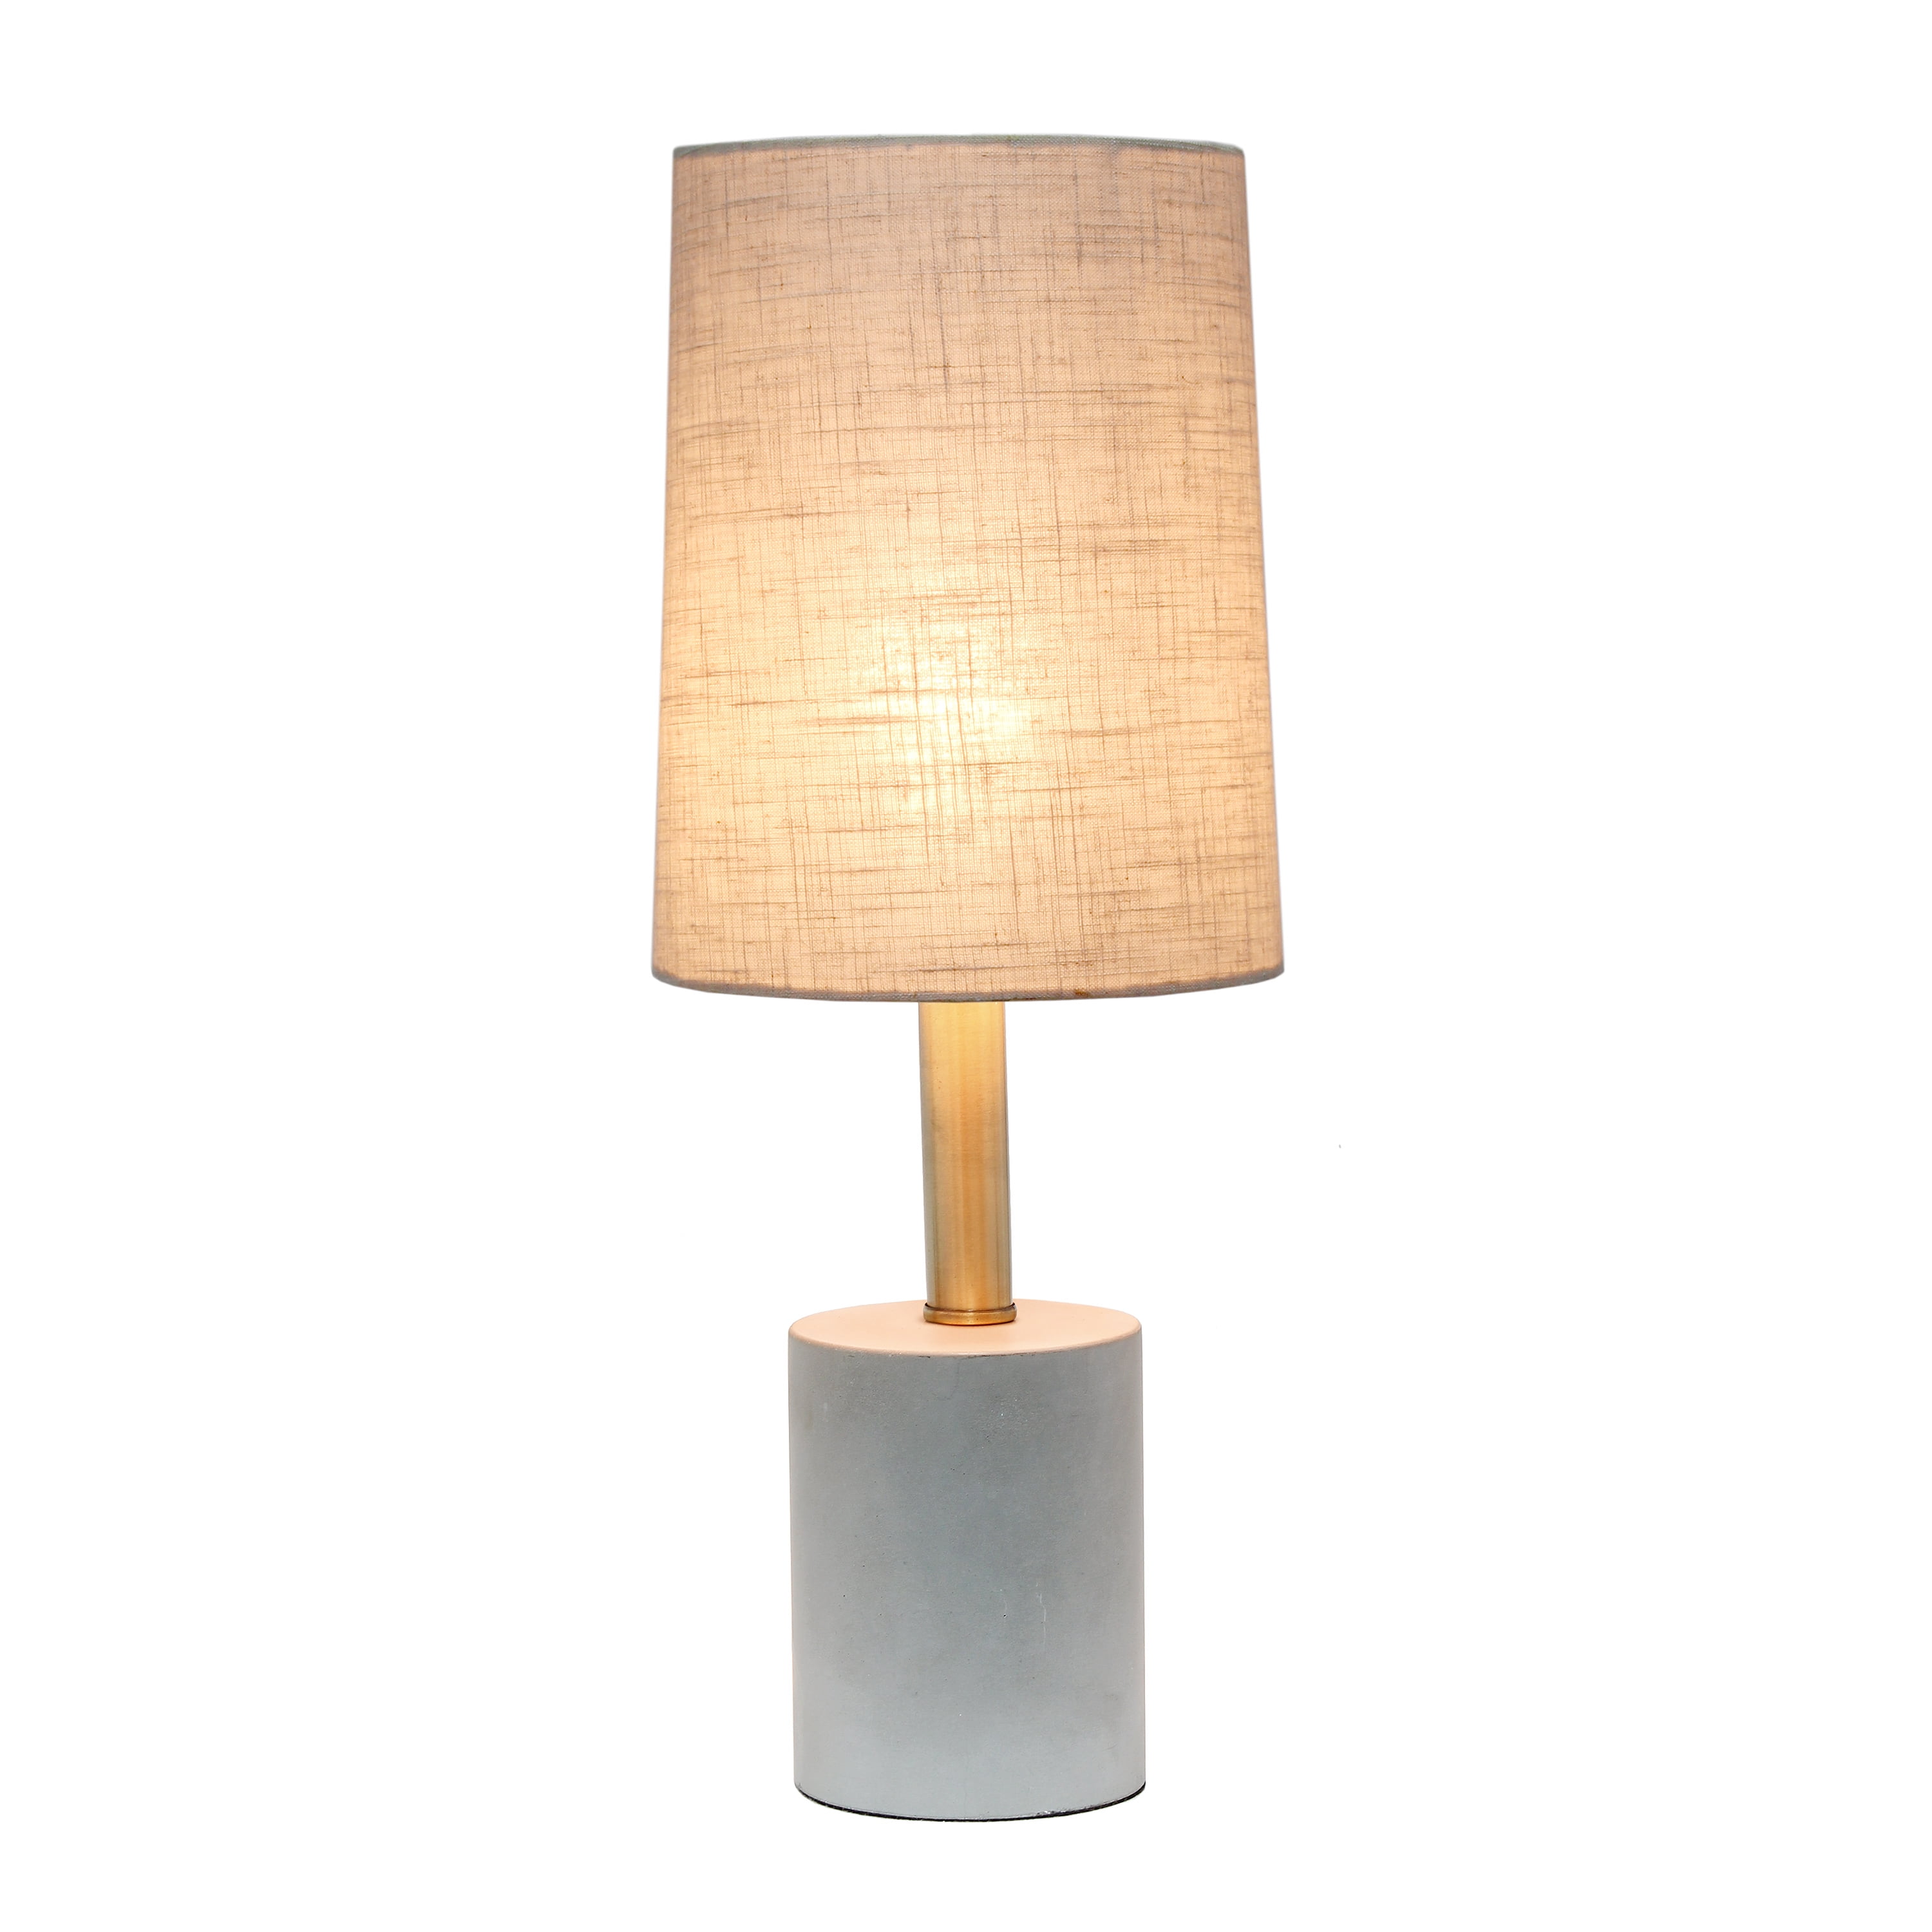 Lalia Home Antique Brass Concrete Table, Modern Antique Brass Table Lamp Shades